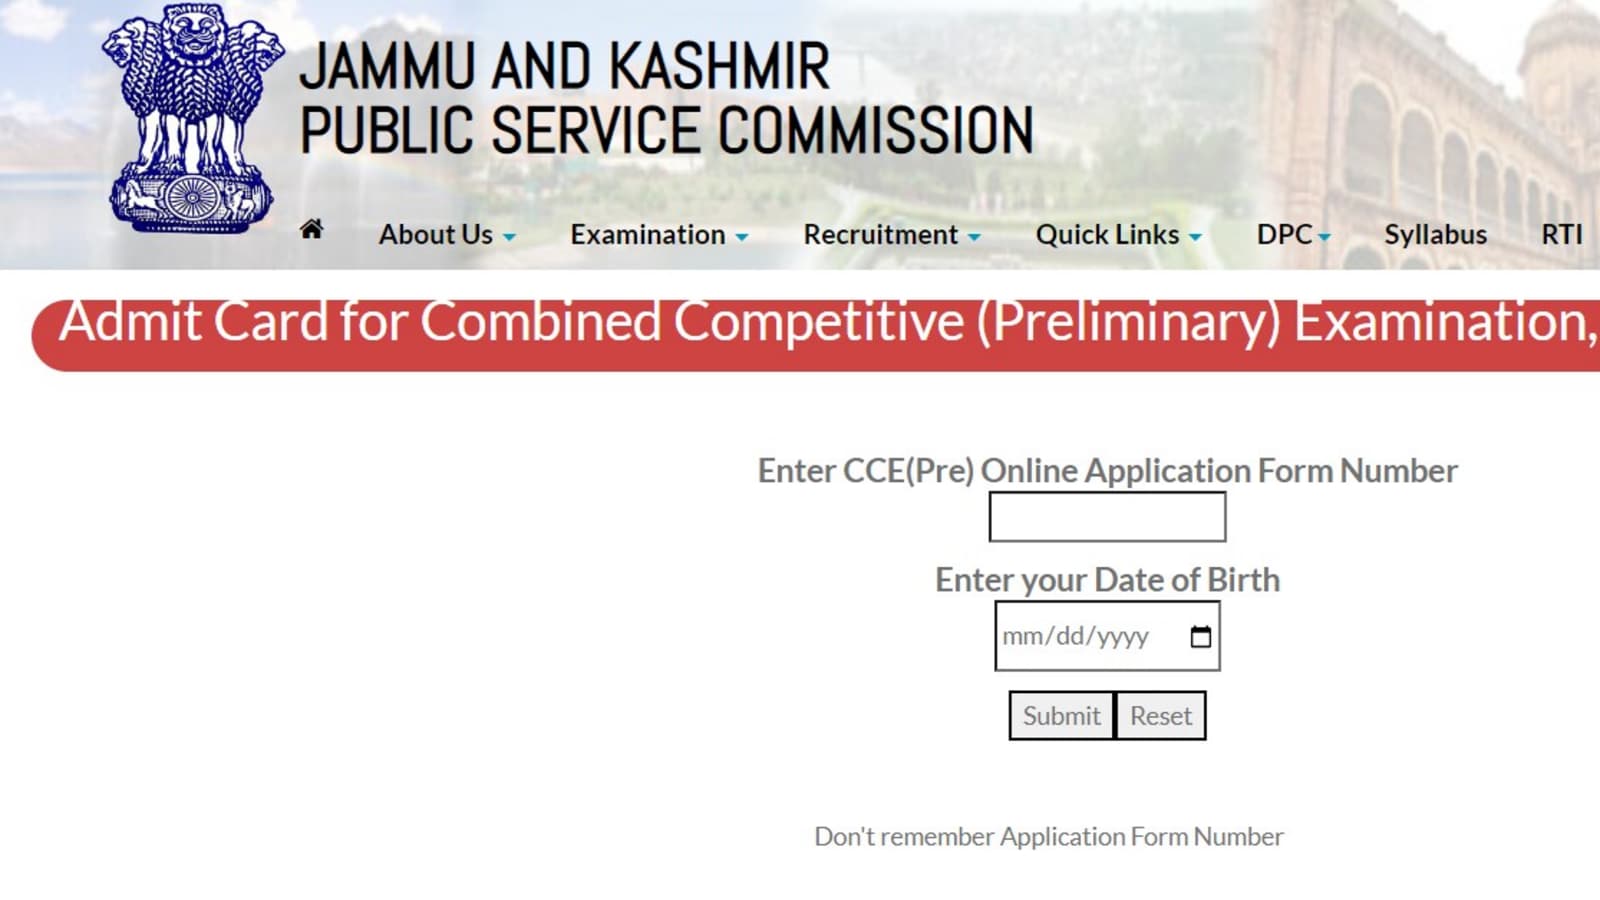 JKPSC CCE admit card released at jkpsc.nic.in, here’s direct link